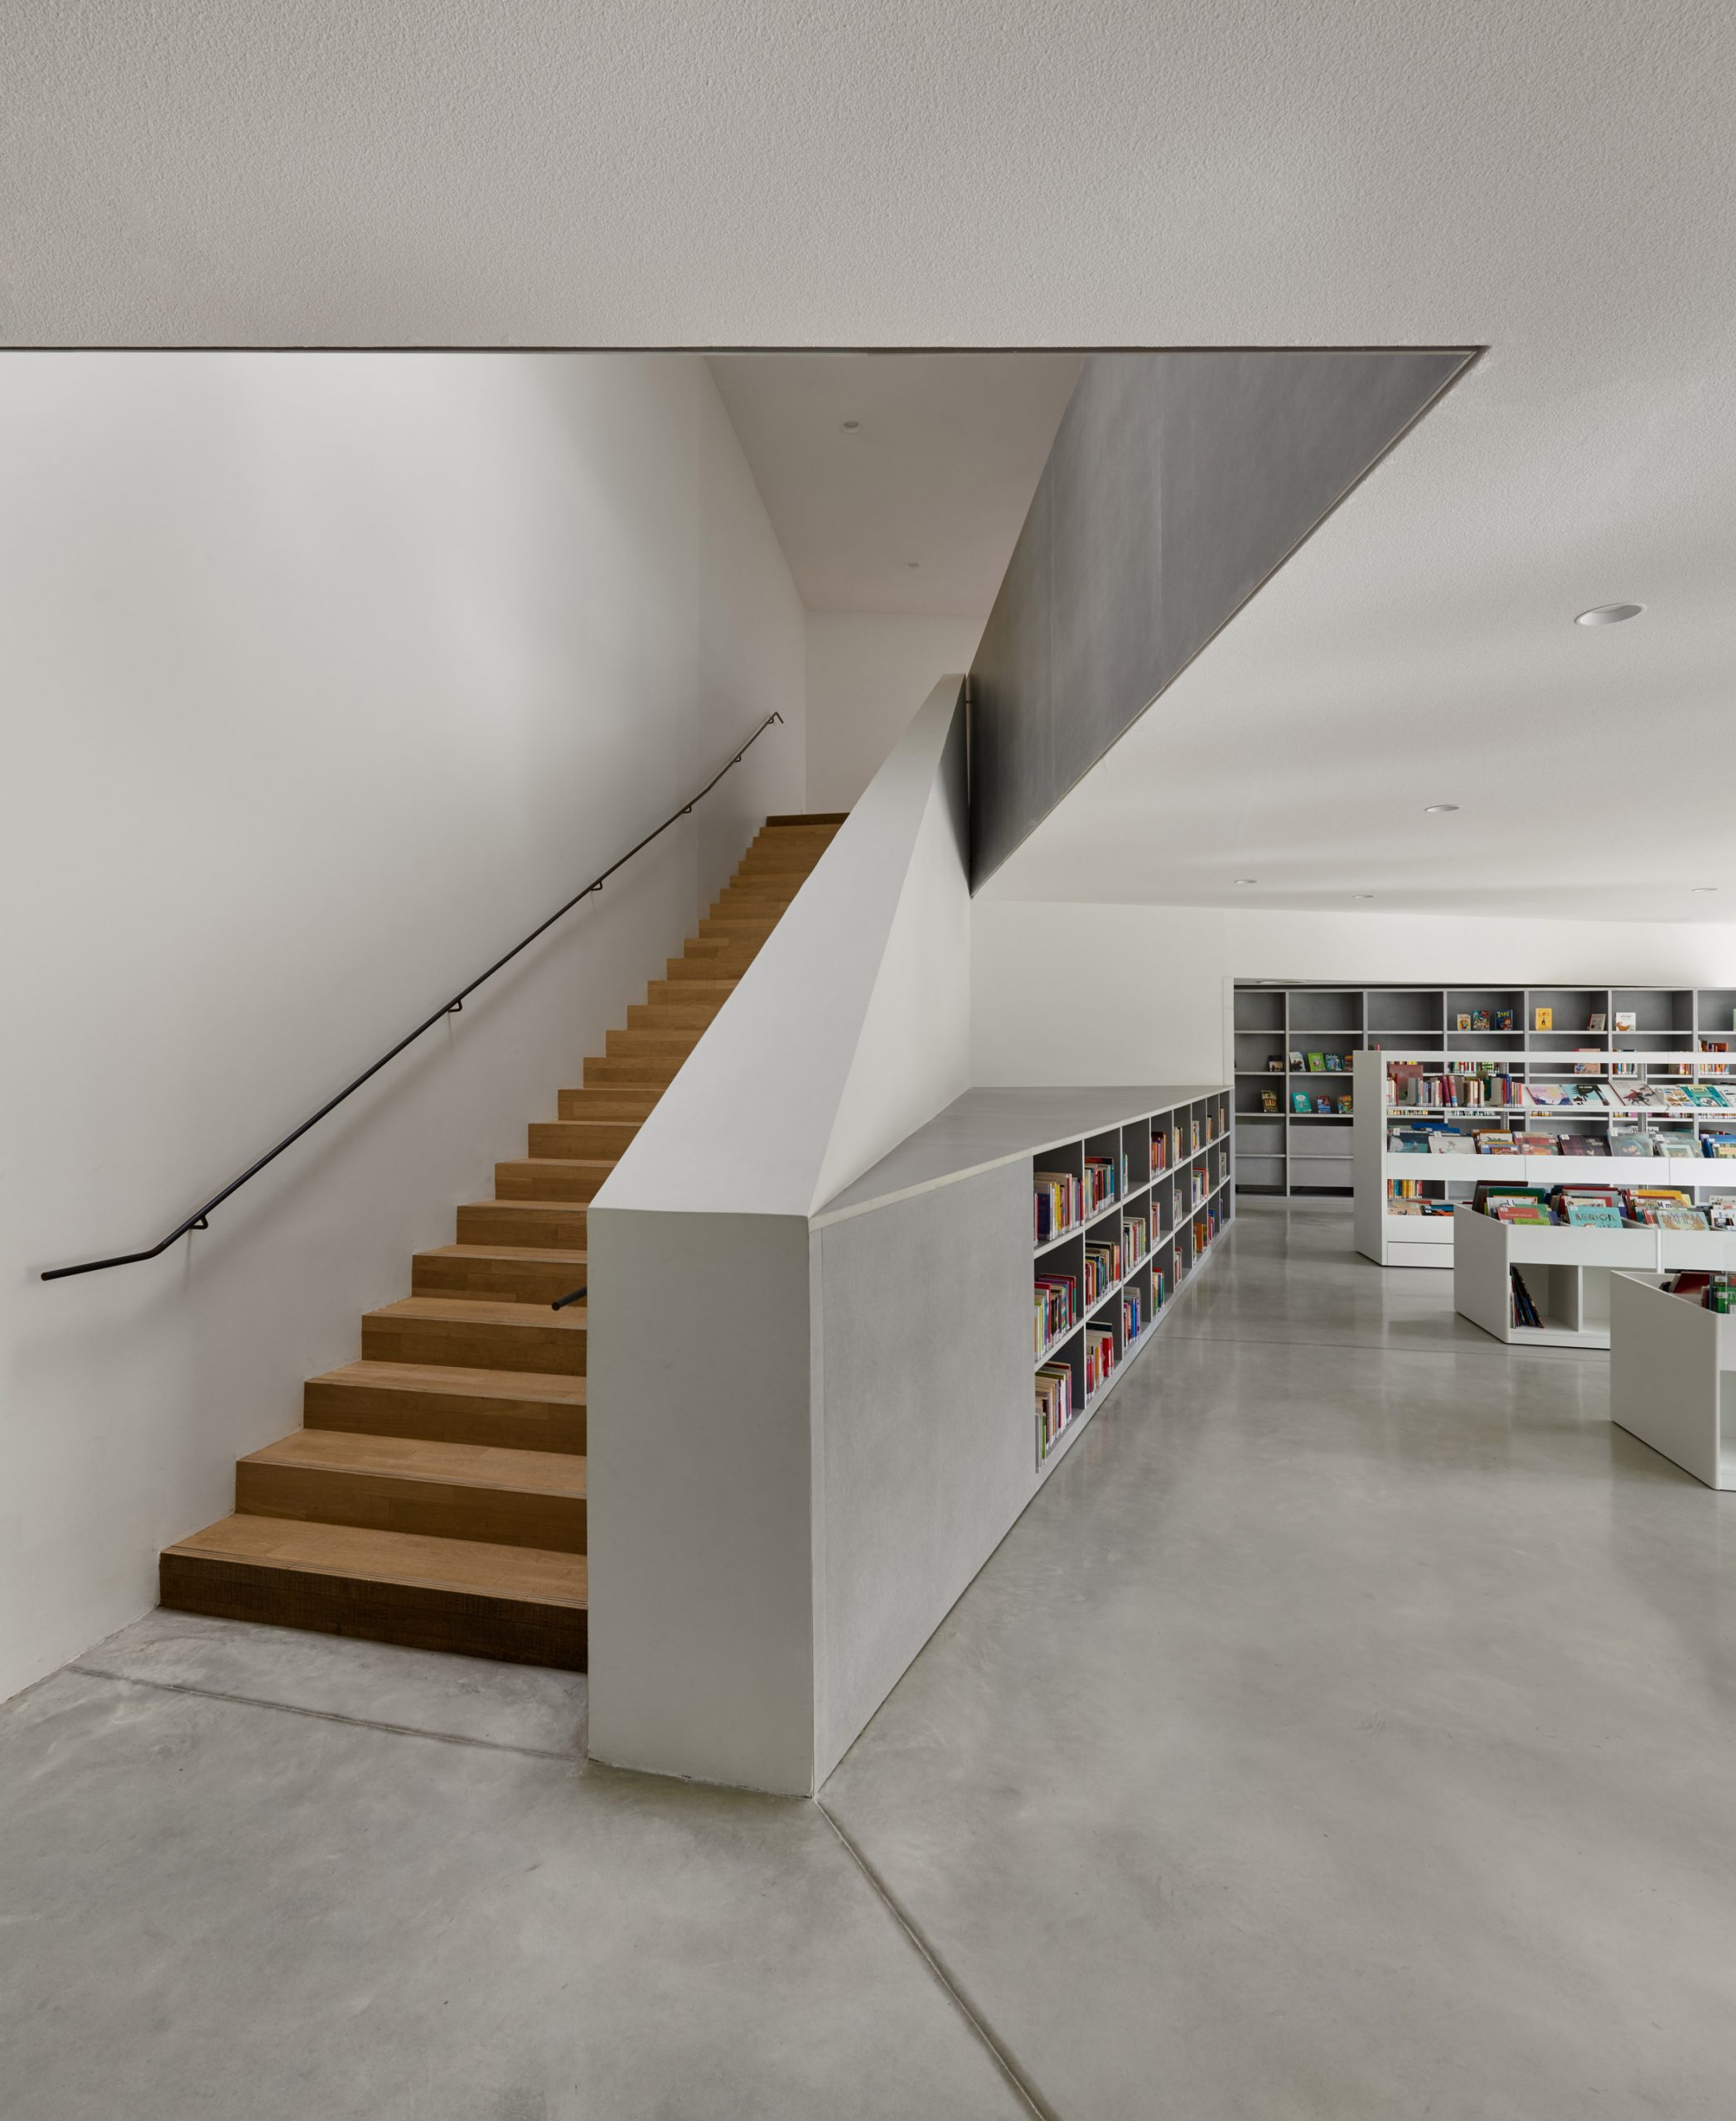 Concrete is paired with wooden stairs by Dominique Coulon & Associés